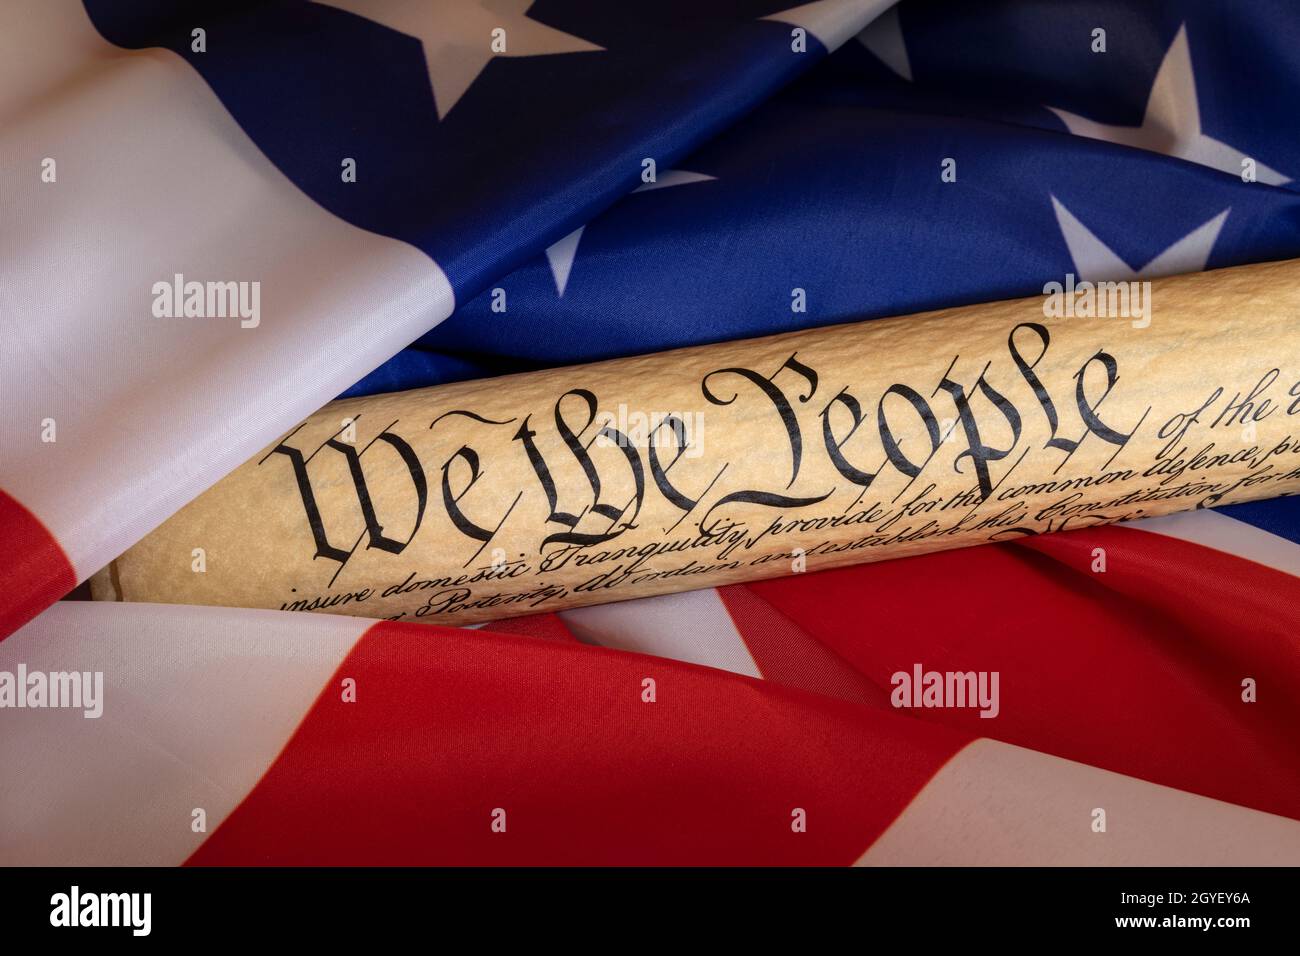 Constitution framed by the American flag symbolizes a land of laws that espouse freedom and prosperity. Stock Photo